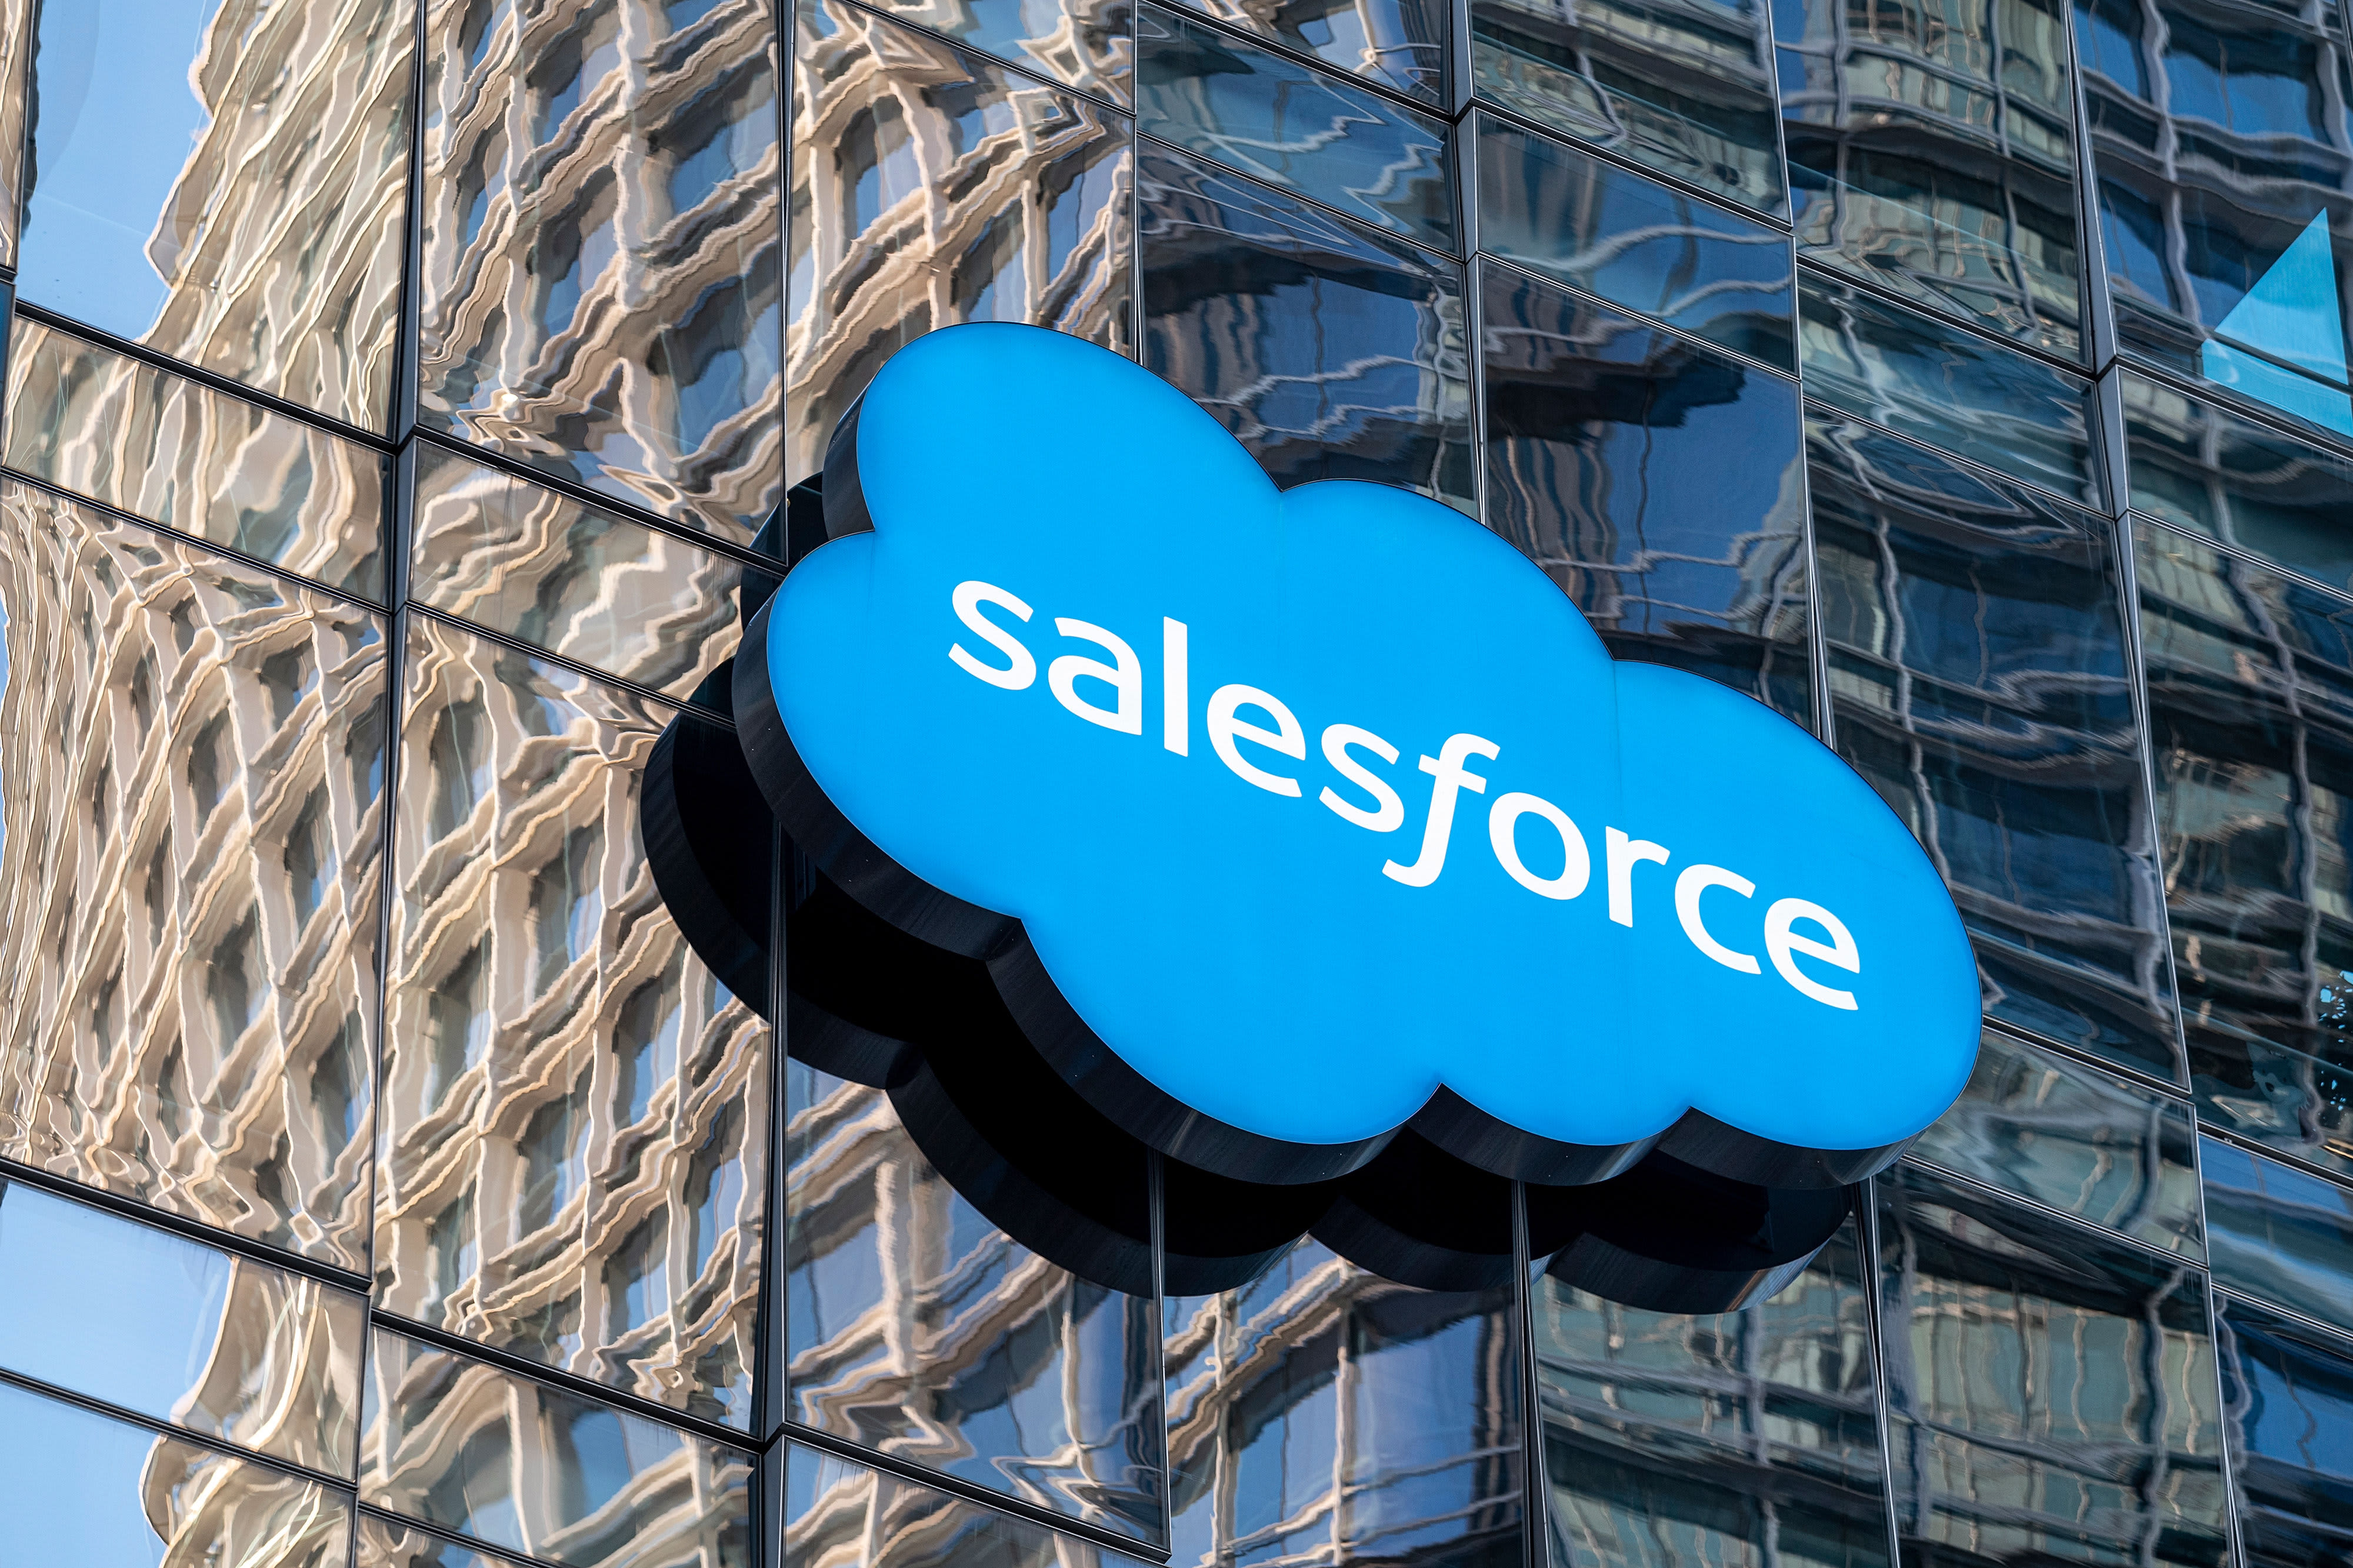 Salesforce shakes up its board, a much-needed move amid executive, activist turmoil